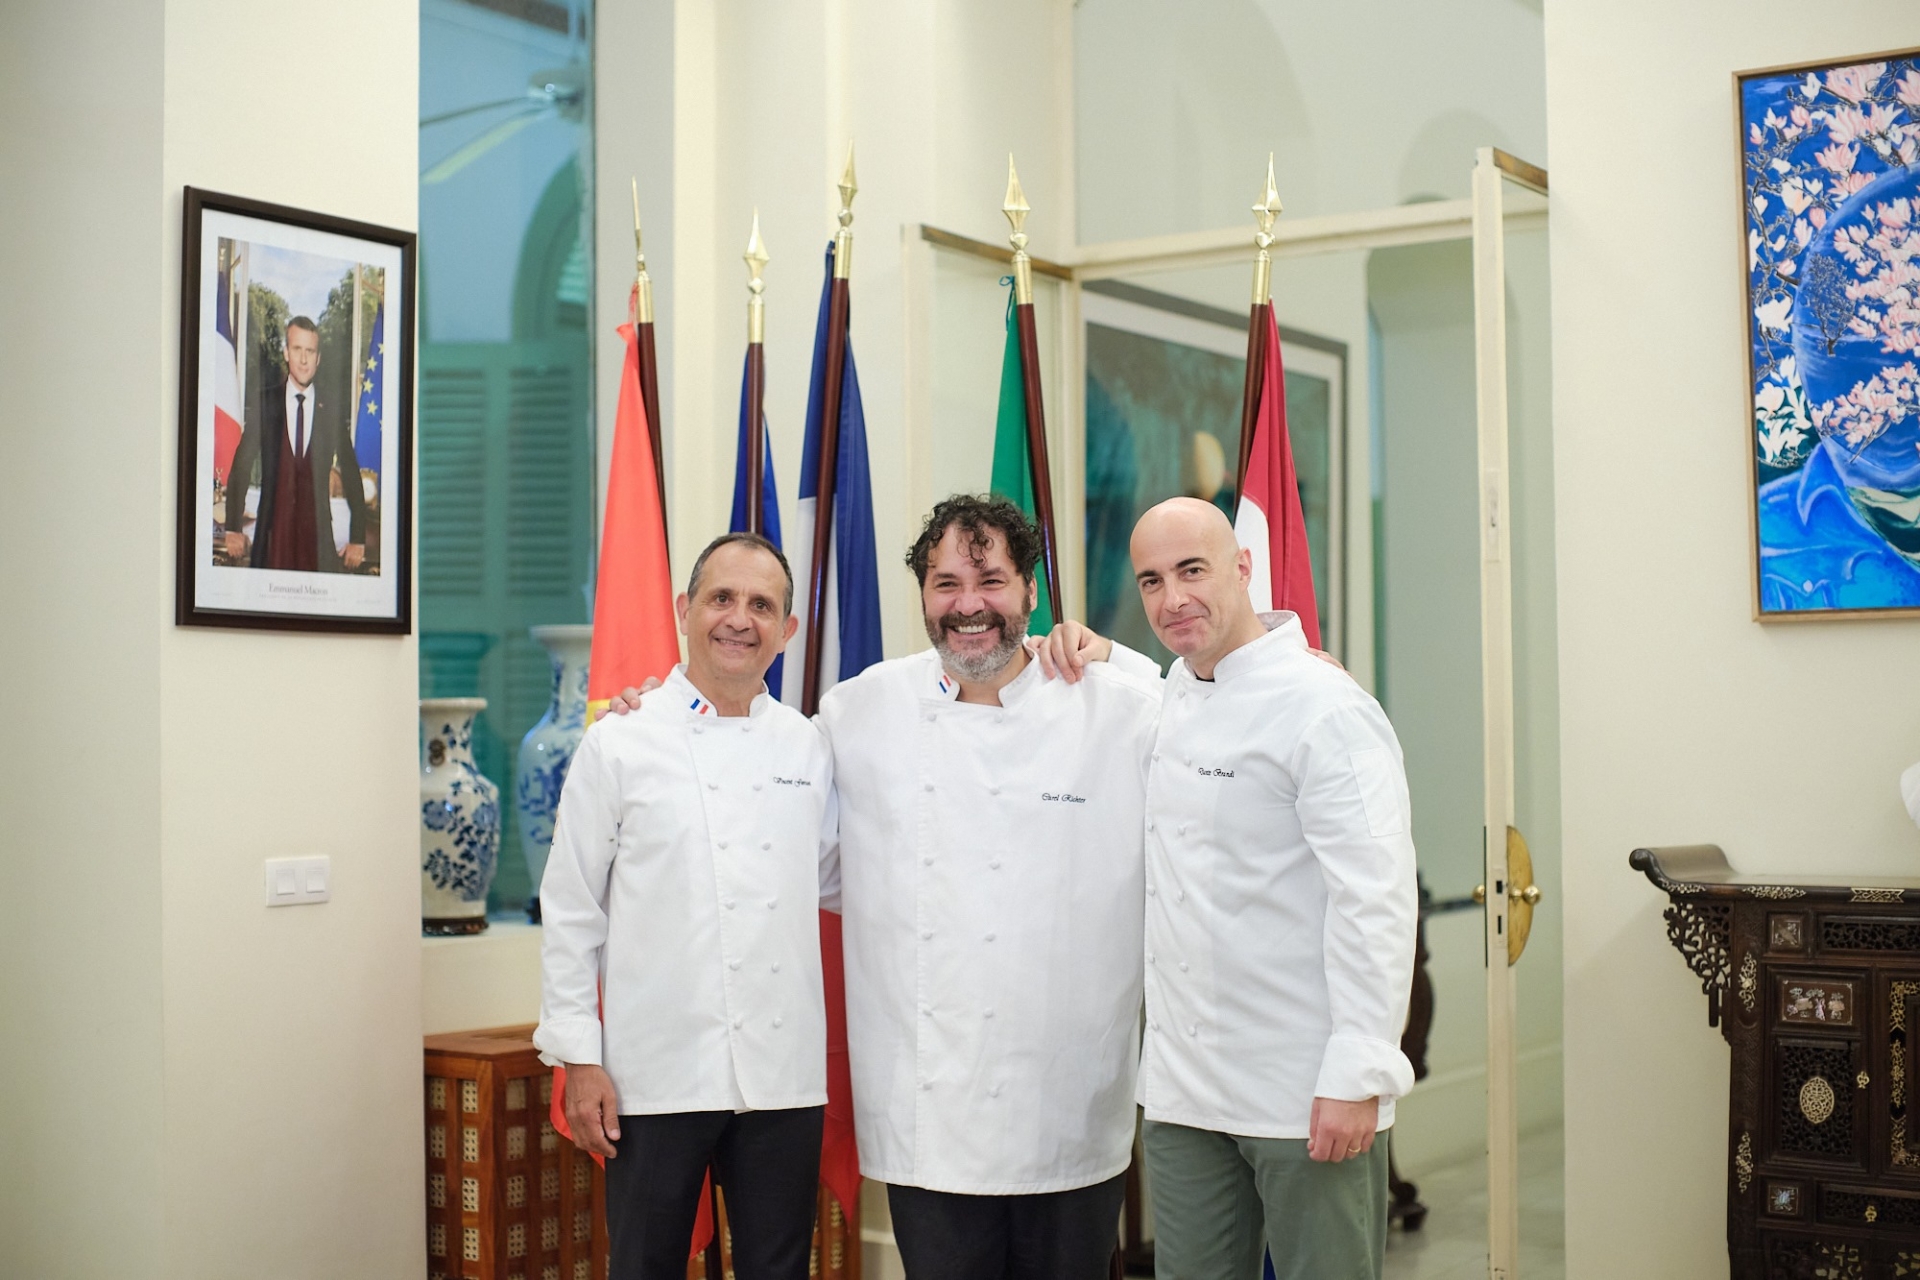 Diplomats cooking for charity activities